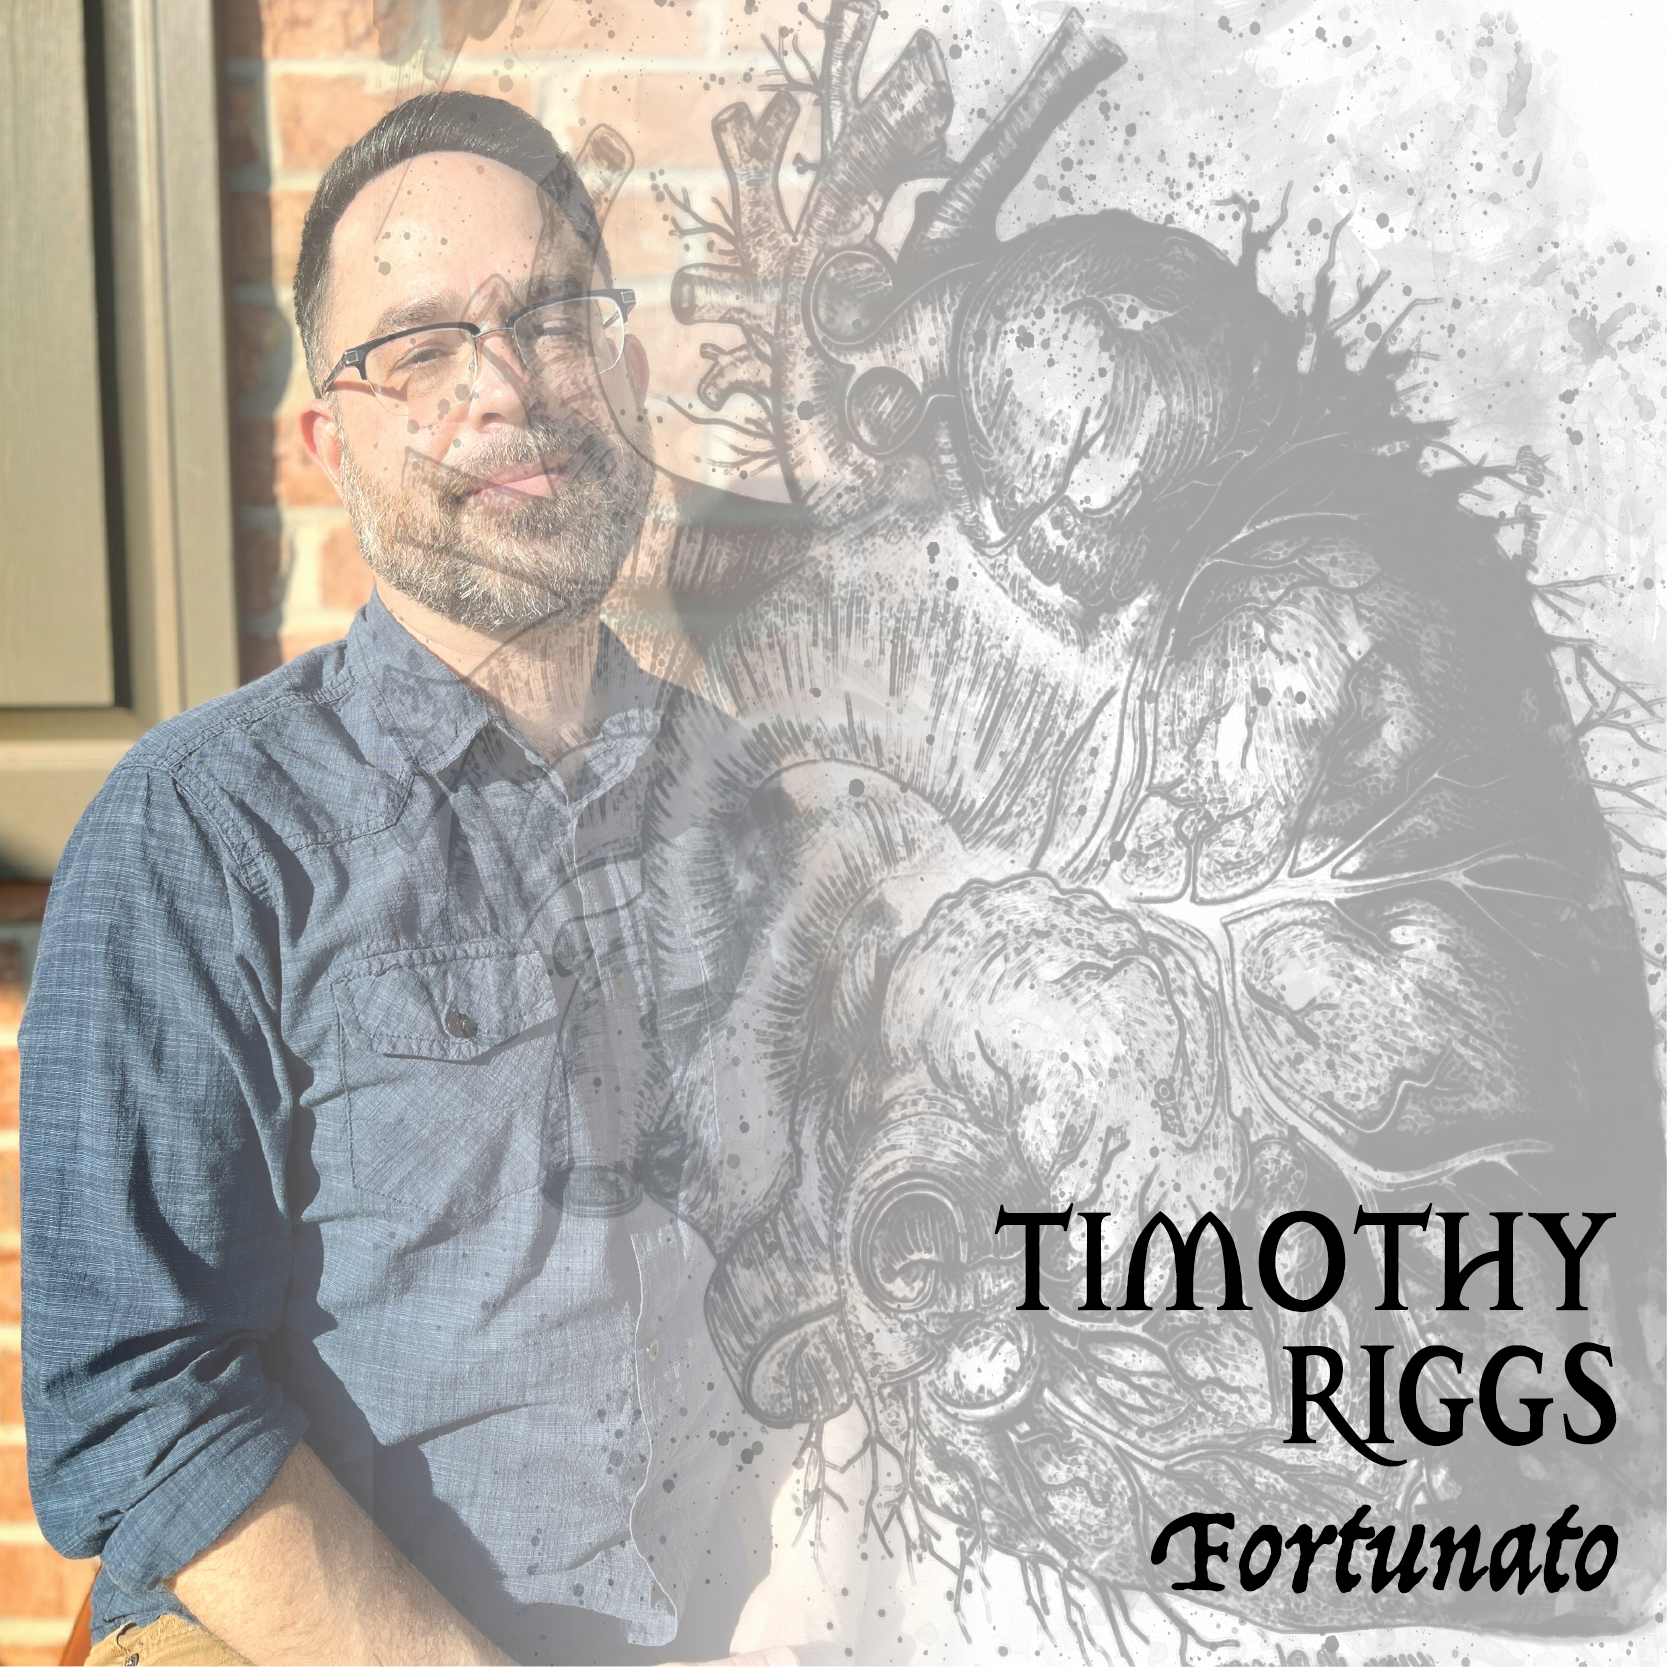 Timothy Riggs is Fortunato